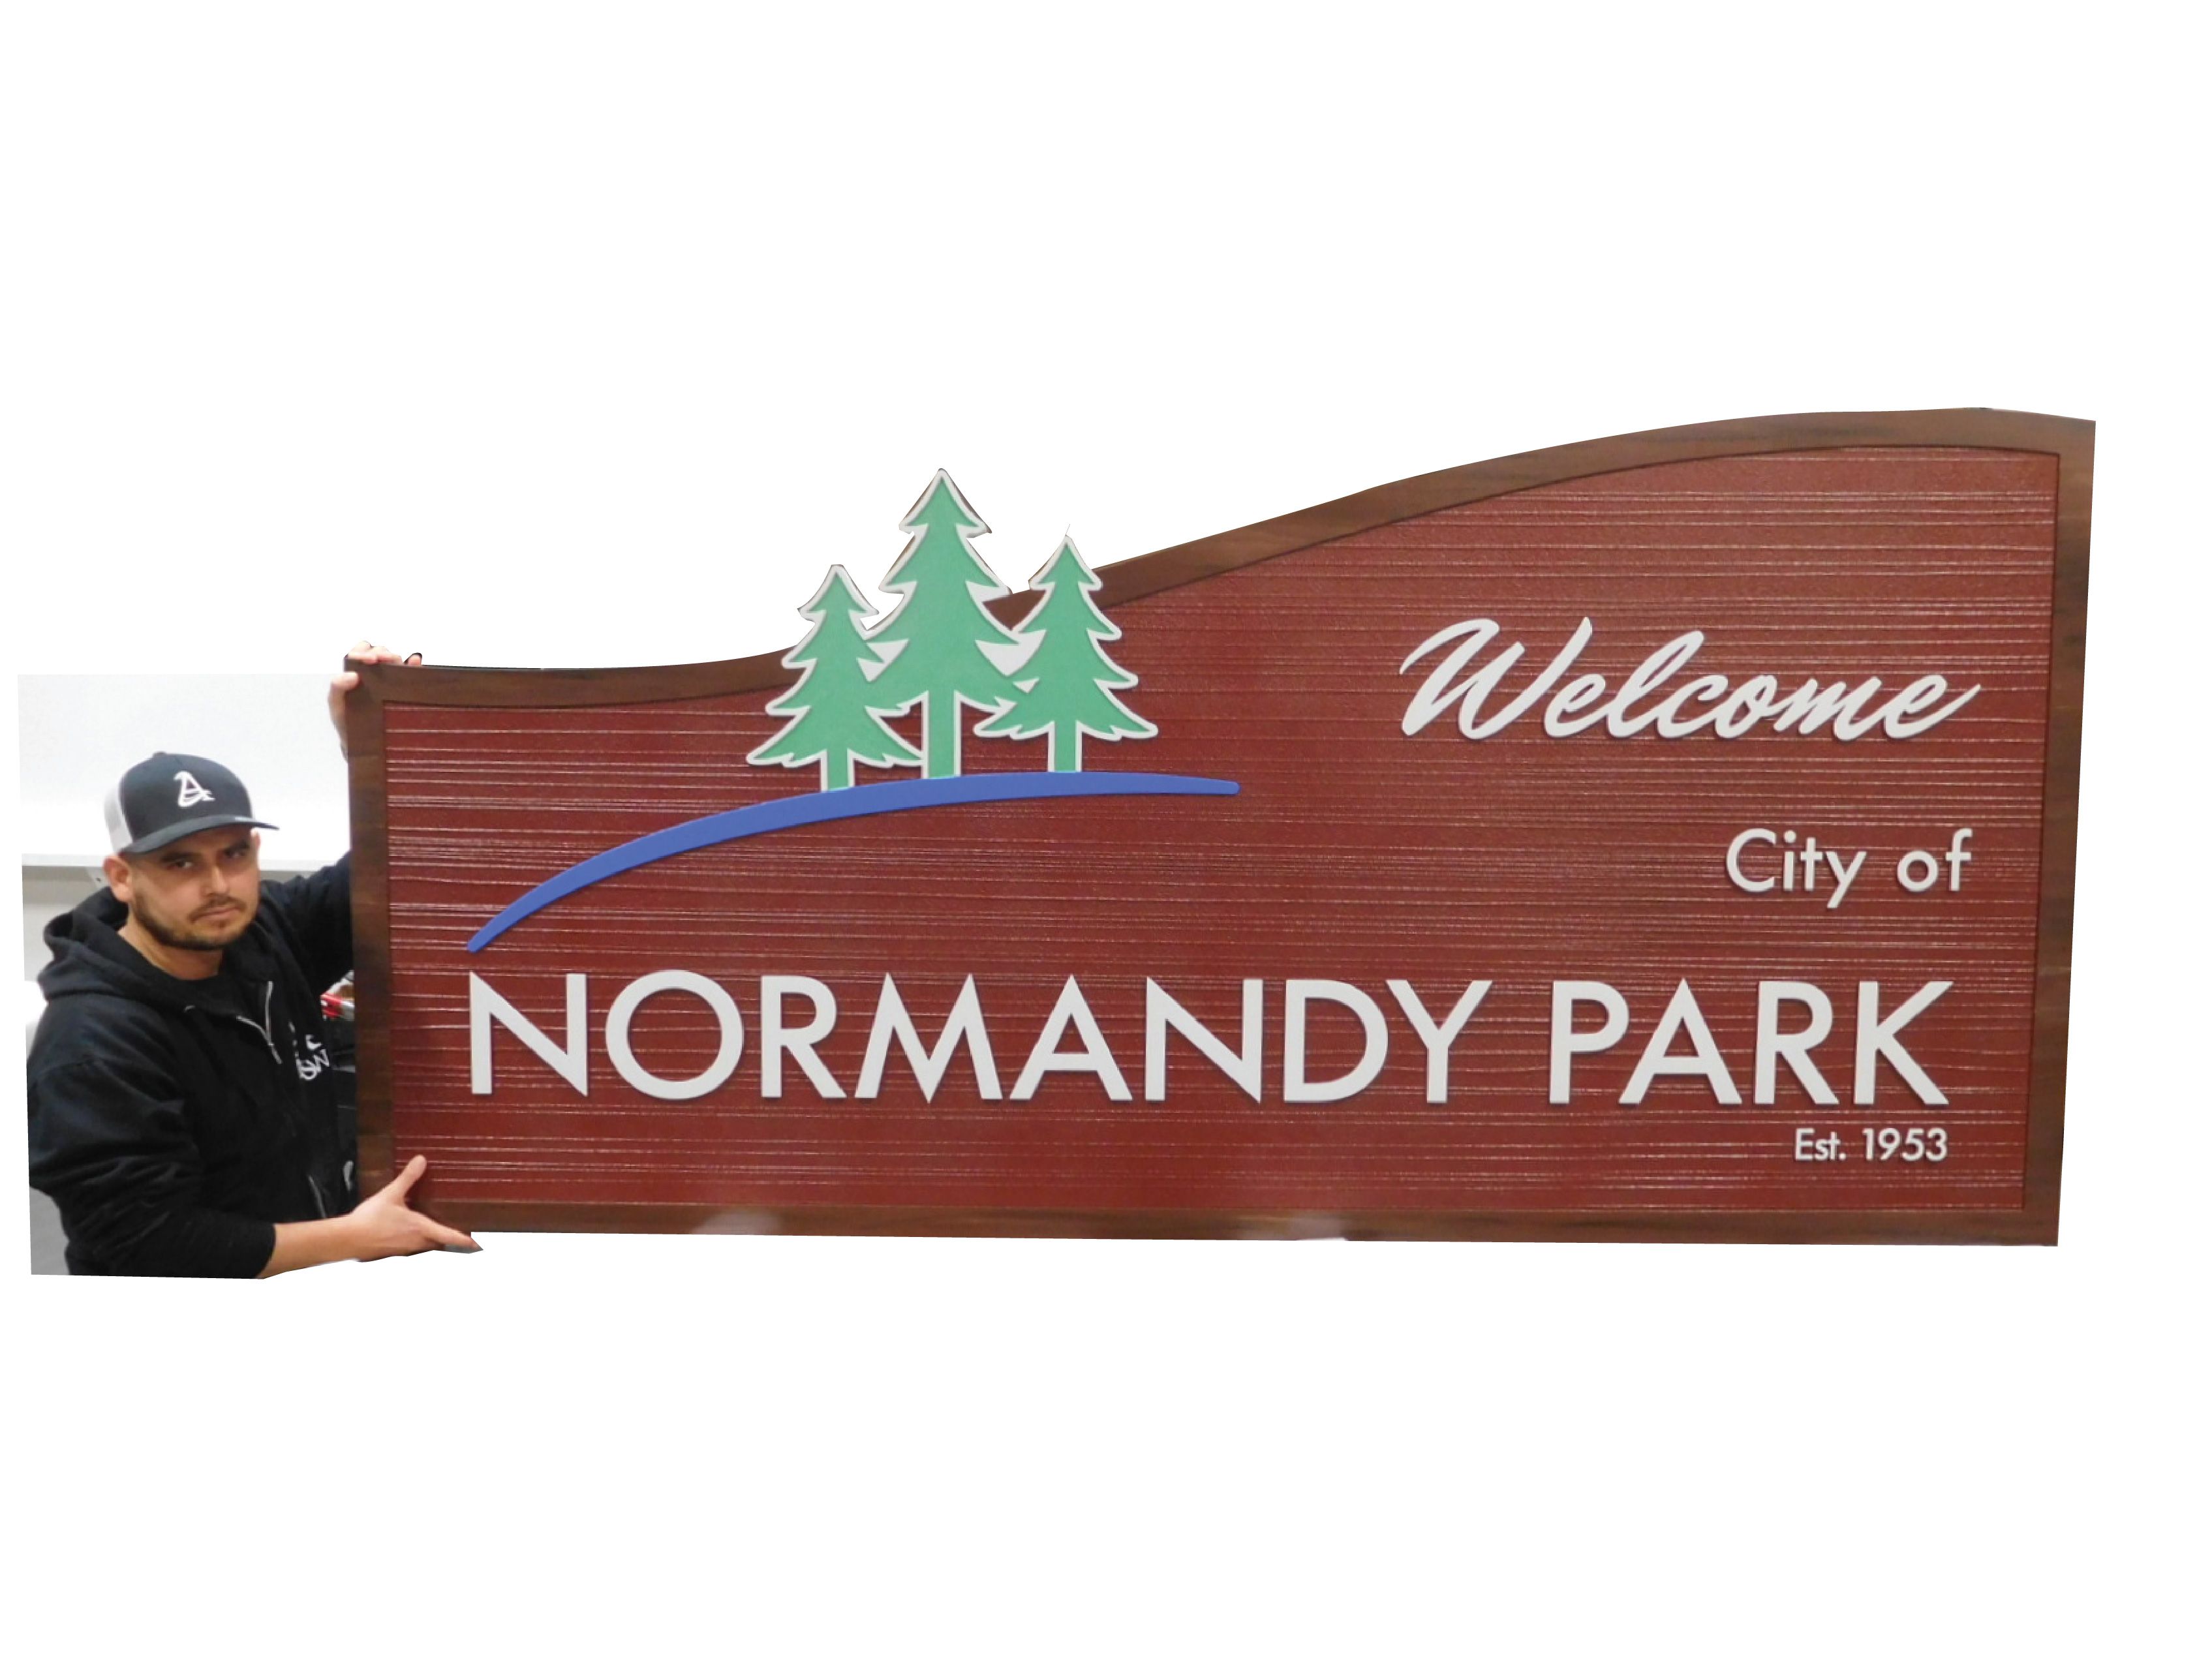 F15349 - Carved and Sandblasted Wood Grain  Entrance and Welcome  Sign  for Normandy Park, 2.5-D with Pine Trees as Artwork